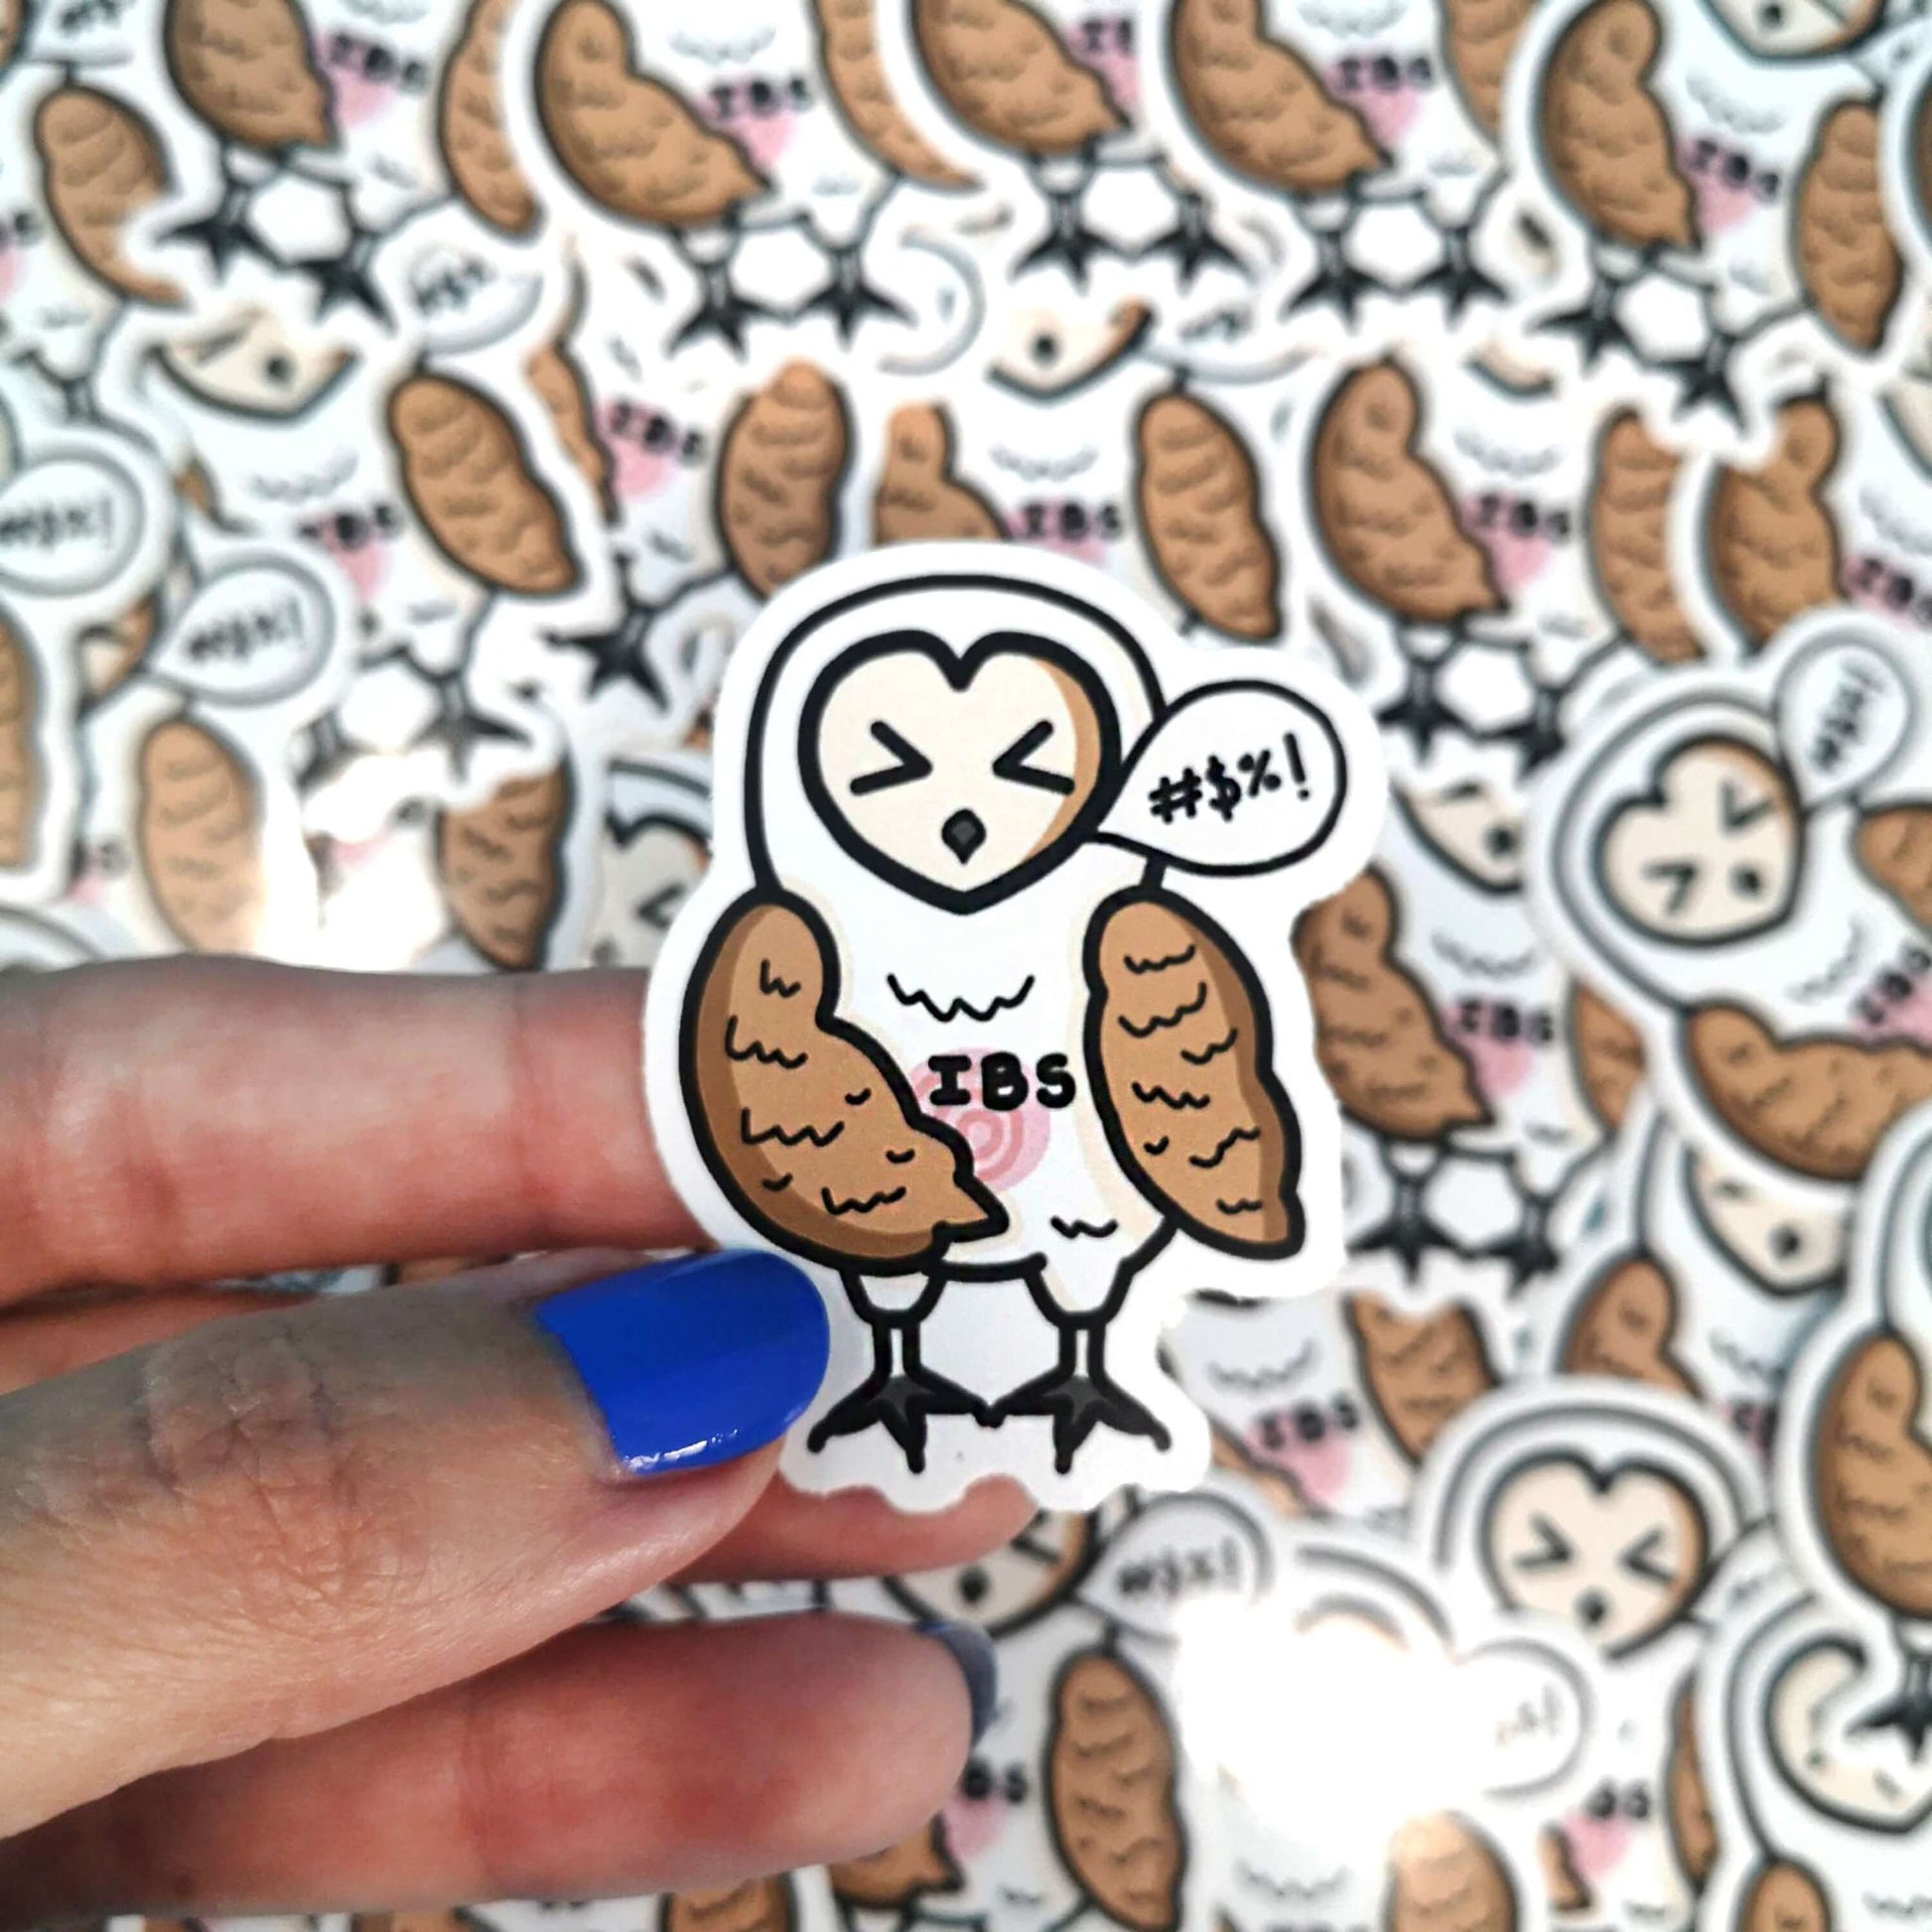 The Irritable Owl Syndrome Sticker - Irritable Bowel Syndrome (IBS) being held over a pile of multiple copies of the same barn owl sticker. The barn owl sticker has its eyes shut with a wing on it's swirling red belly and a speech bubble with swearing symbols inside, across its middle in black text reads 'IBS'. The hand drawn design is raising awareness for irritable bowel syndrome and food intolerances.